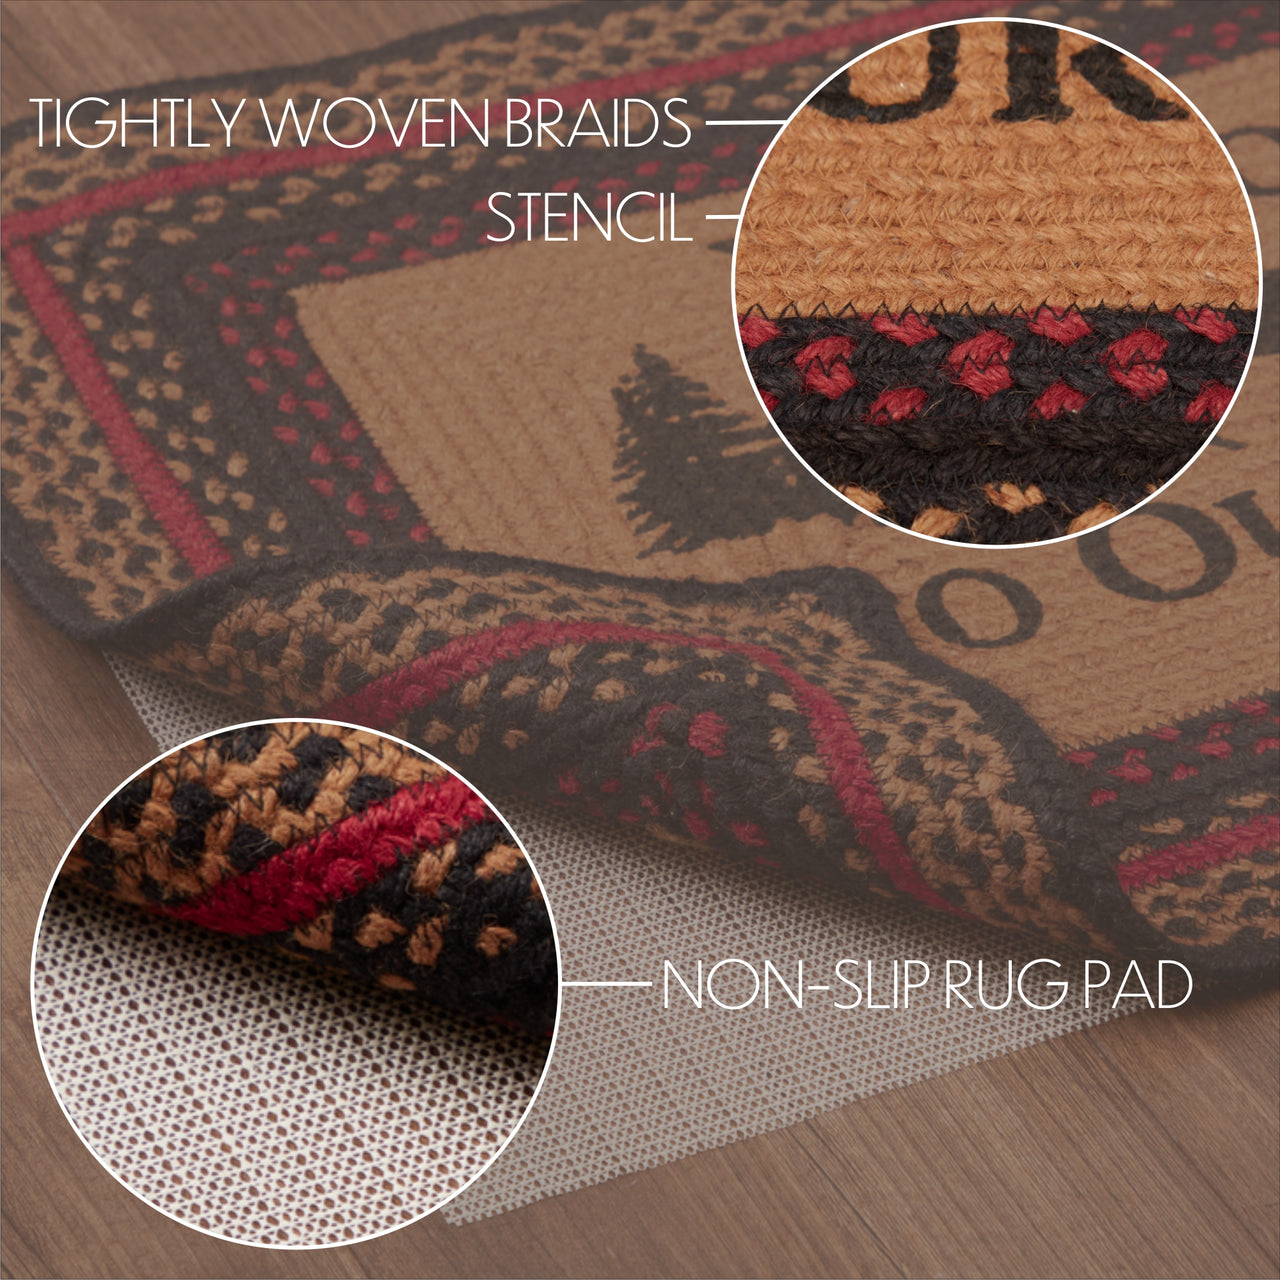 Cumberland Stenciled Moose Jute Braided Rug Rect Welcome to the Cabin 20"x30" with Rug Pad VHC Brands